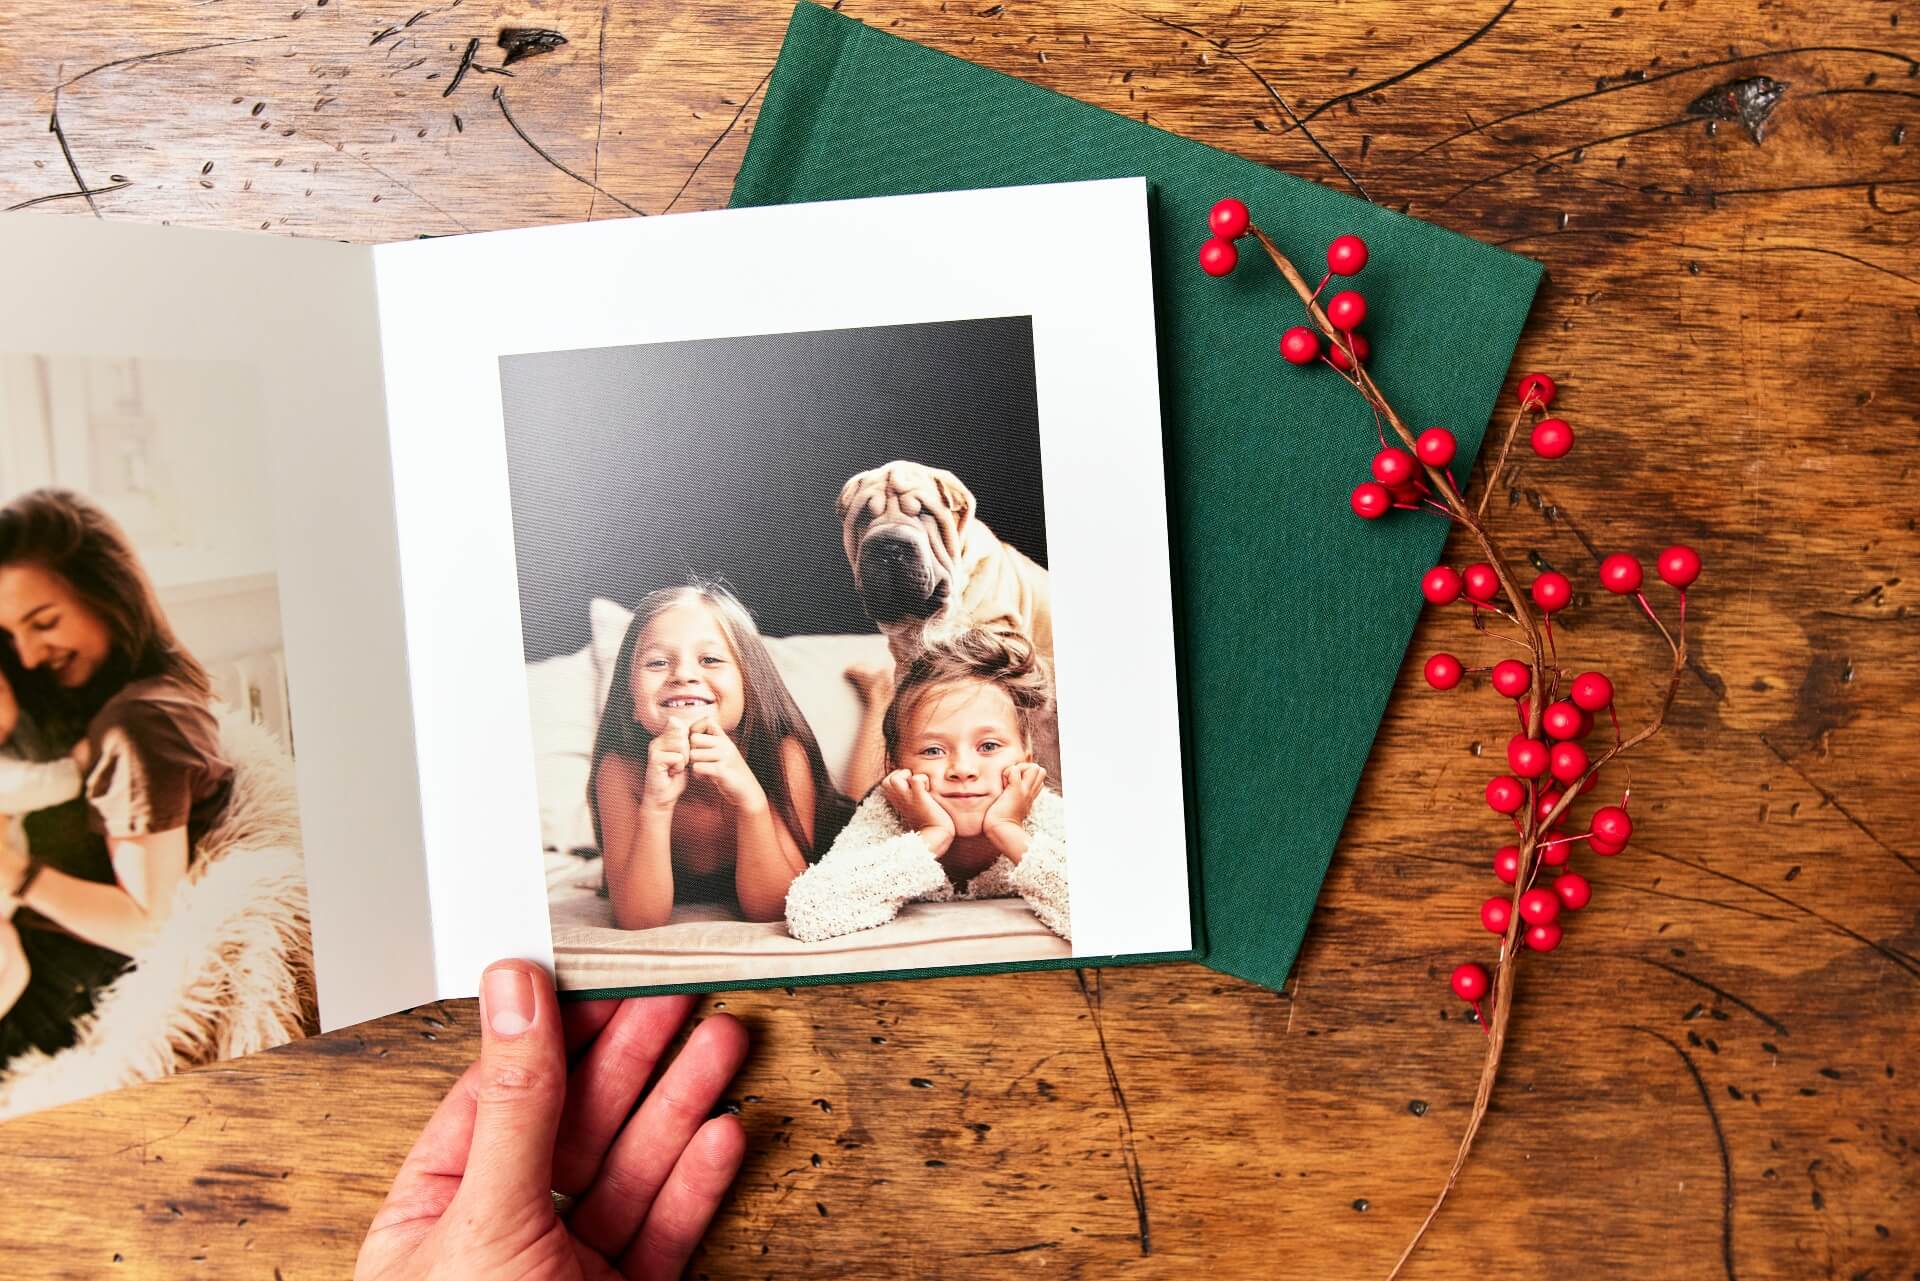 Can’t-Miss Gifts: Five Custom Photo Book Projects